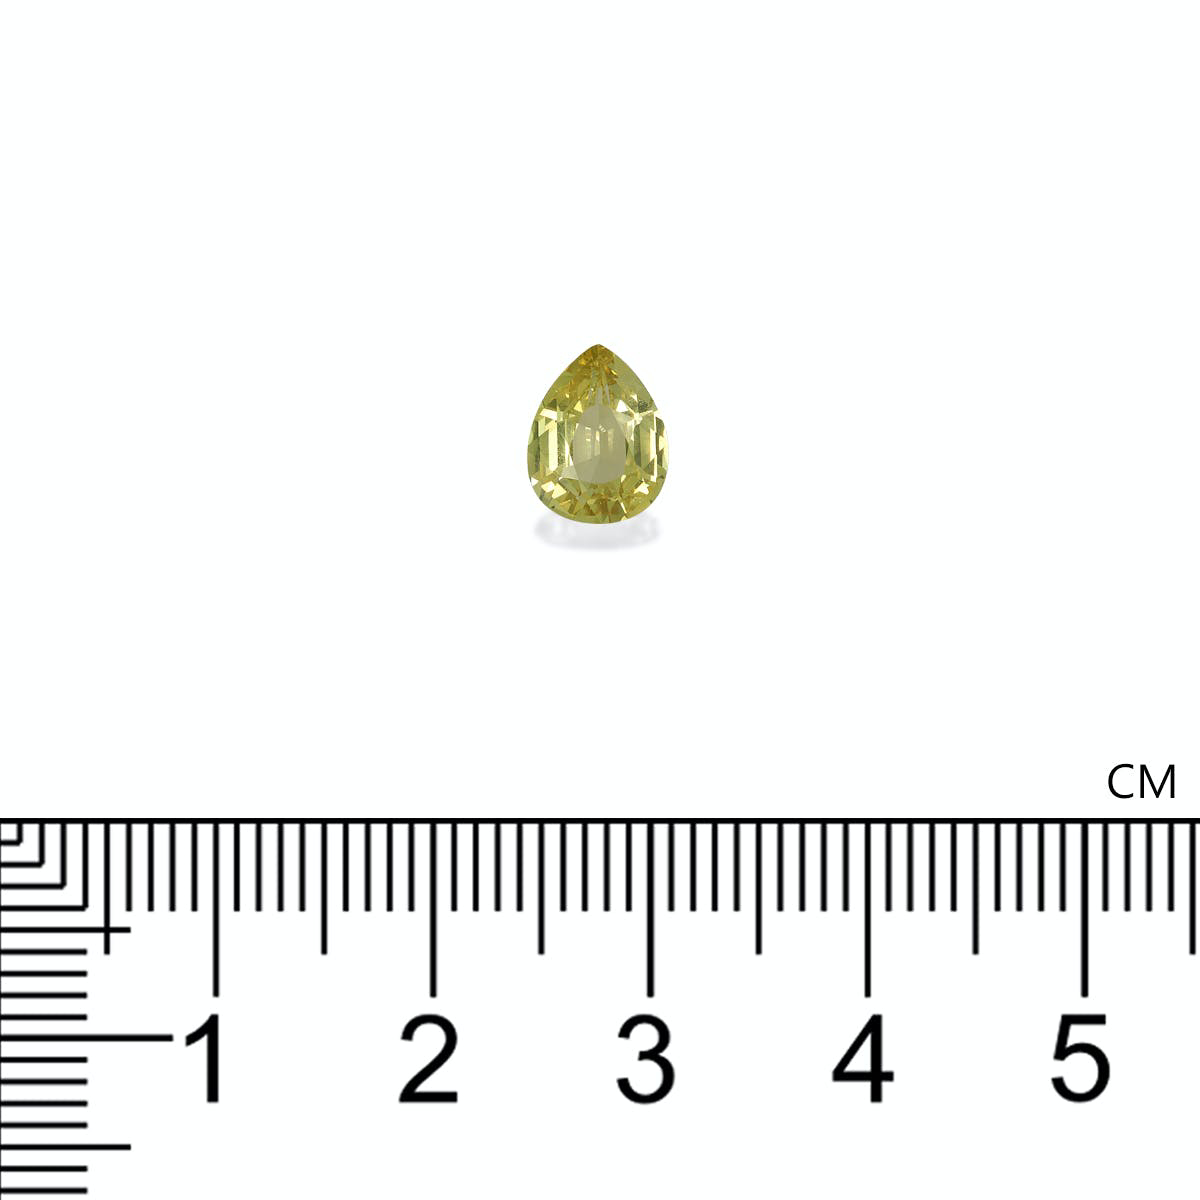 Picture of Golden Yellow Chrysoberyl 1.38ct - 8x6mm (CB0181)